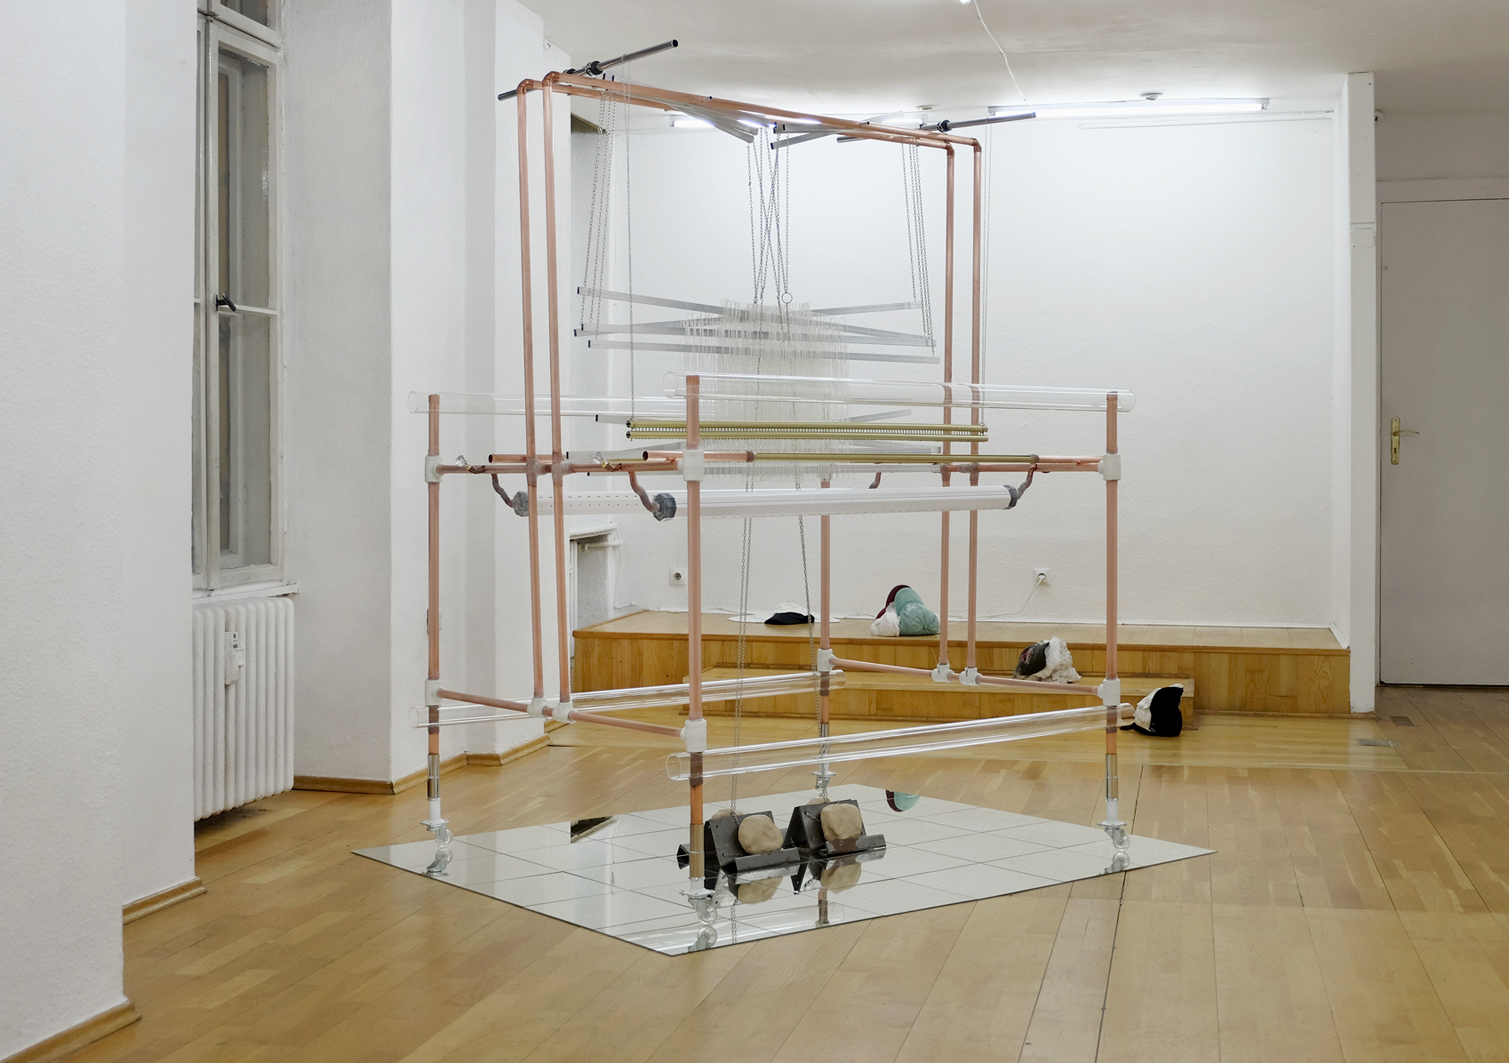 Dana Lorenz, Loomed Body, 2019, 150x220x130cm — i.a. copper tubes, acrylic pipes, screws, plastic connections, transparent repair tape, nylon threads, aluminium bars, round steel chains, clay, mirror